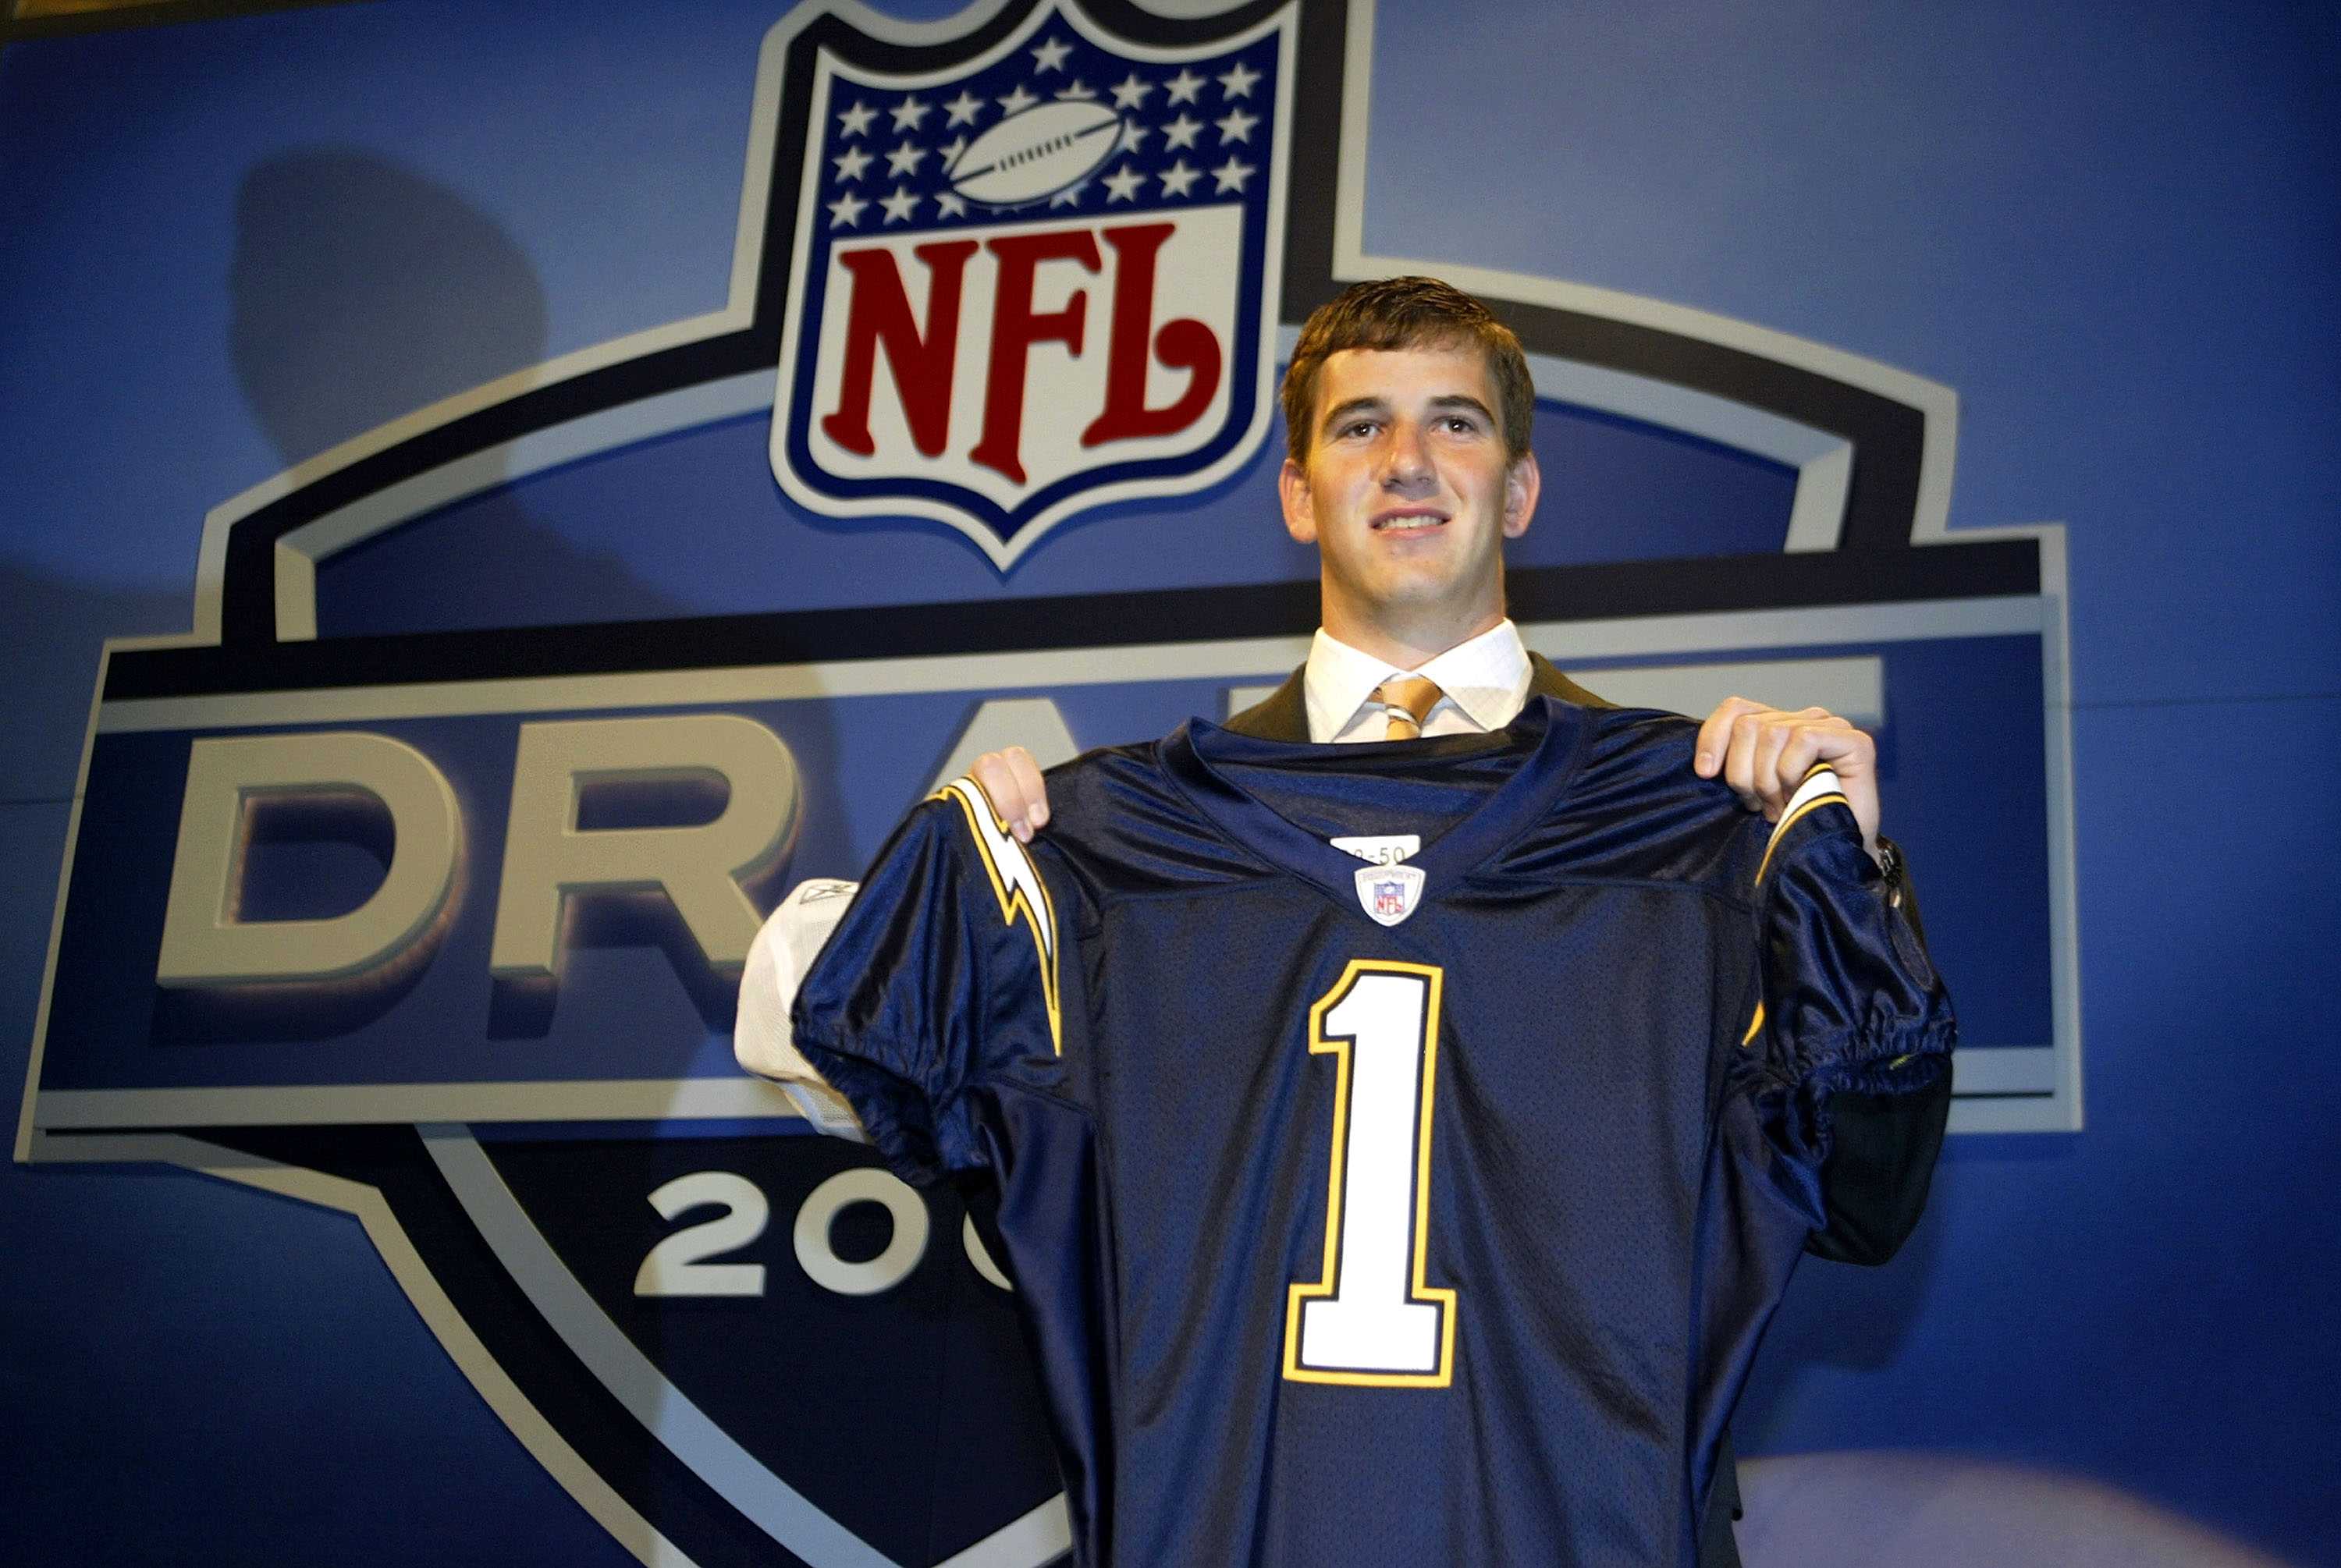 2004 NFL Draft: A Look Back at One of Best Drafts a Team Has Ever